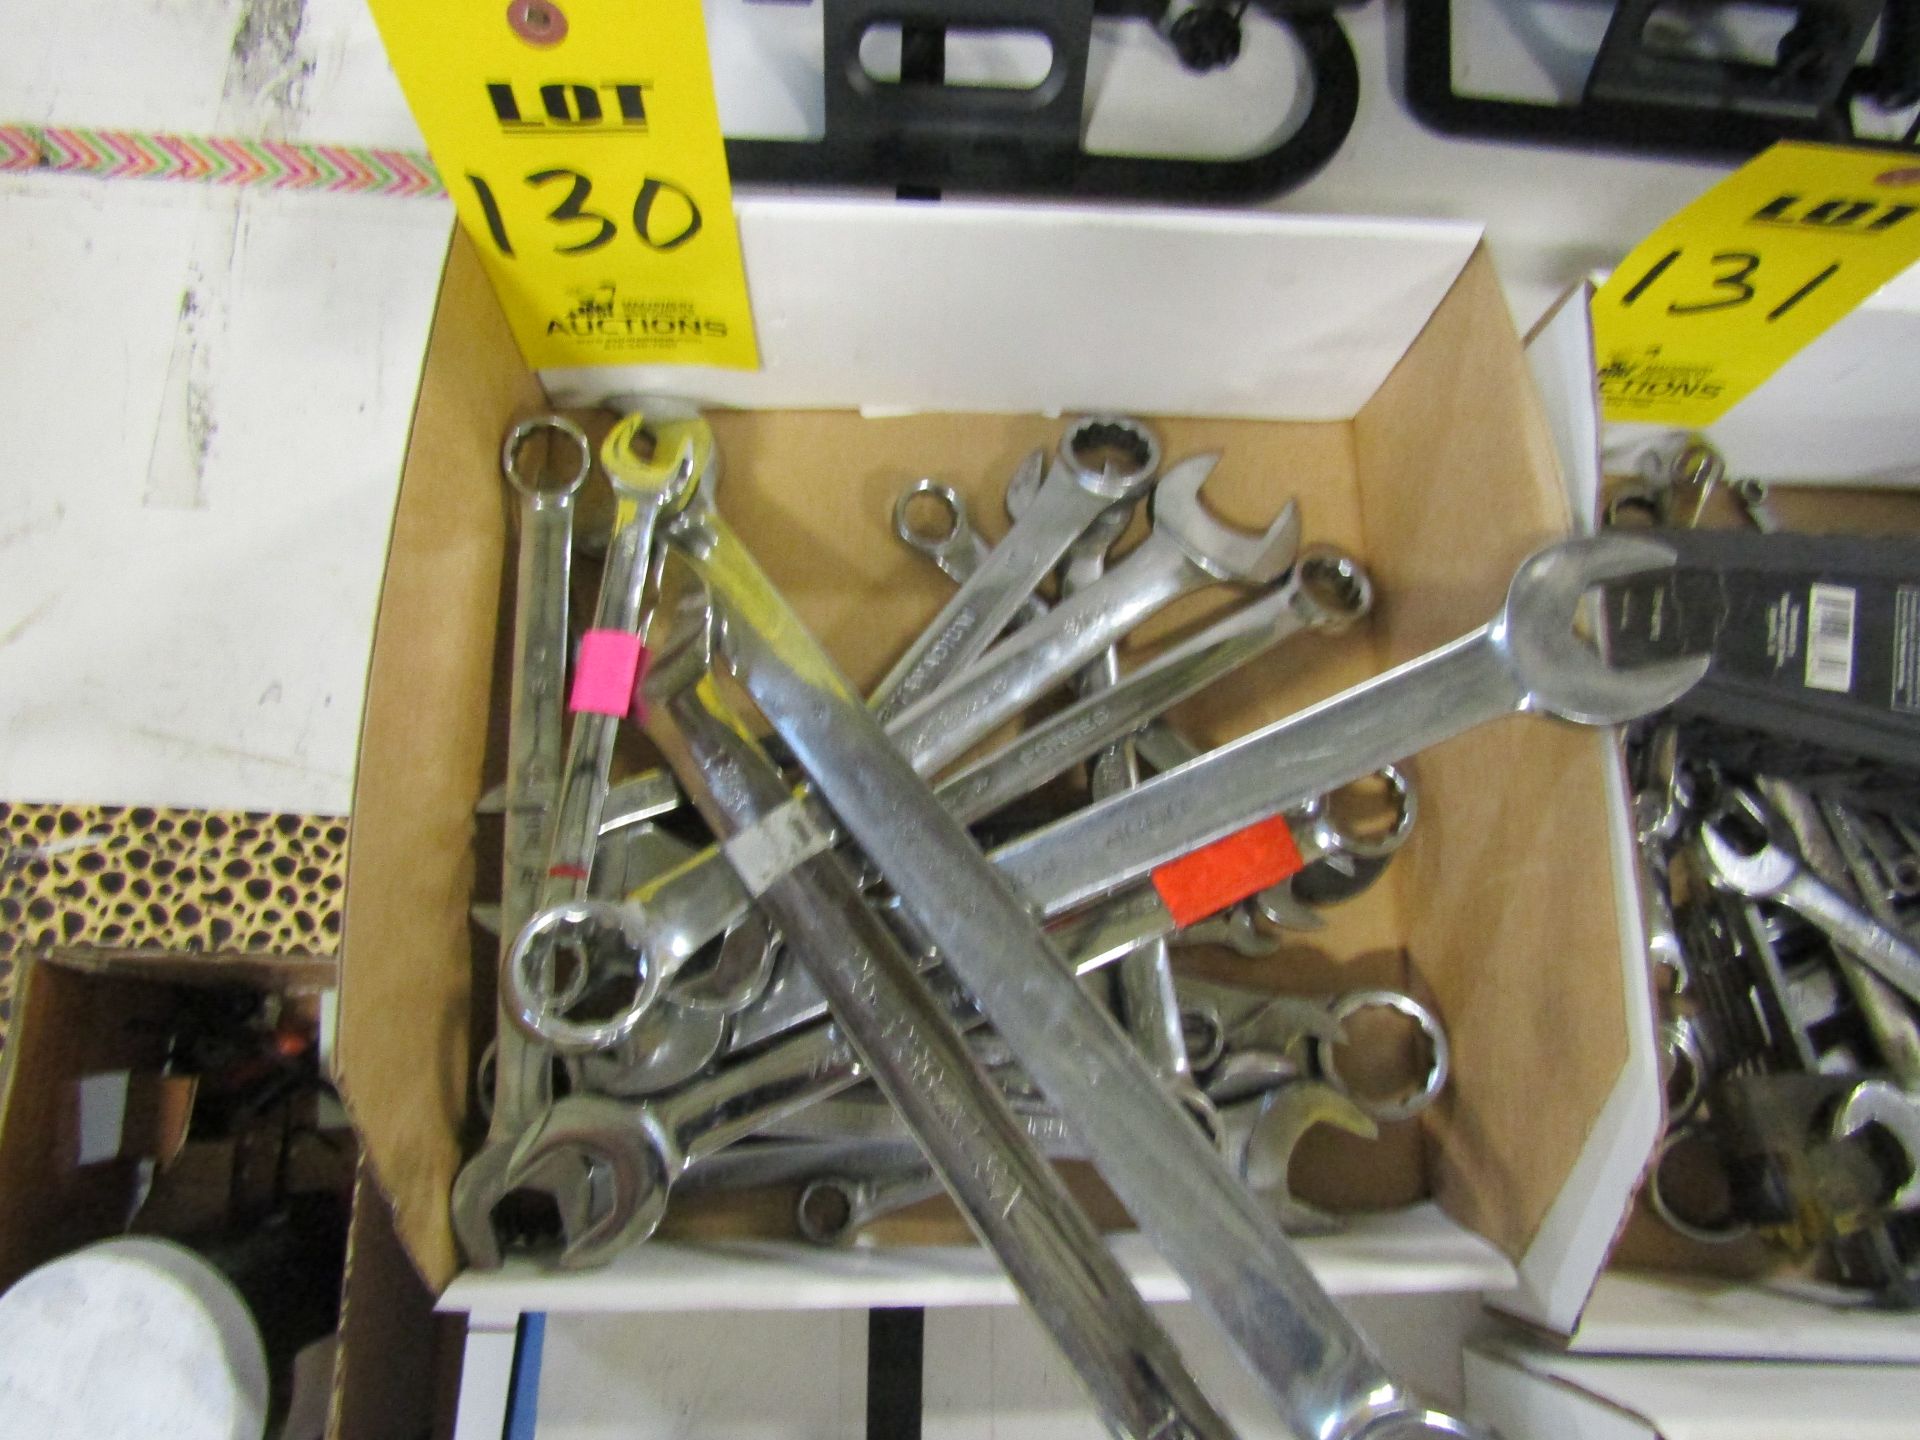 Misc. PITTSBURGH Wrenches, Varied Sizes - Image 2 of 2